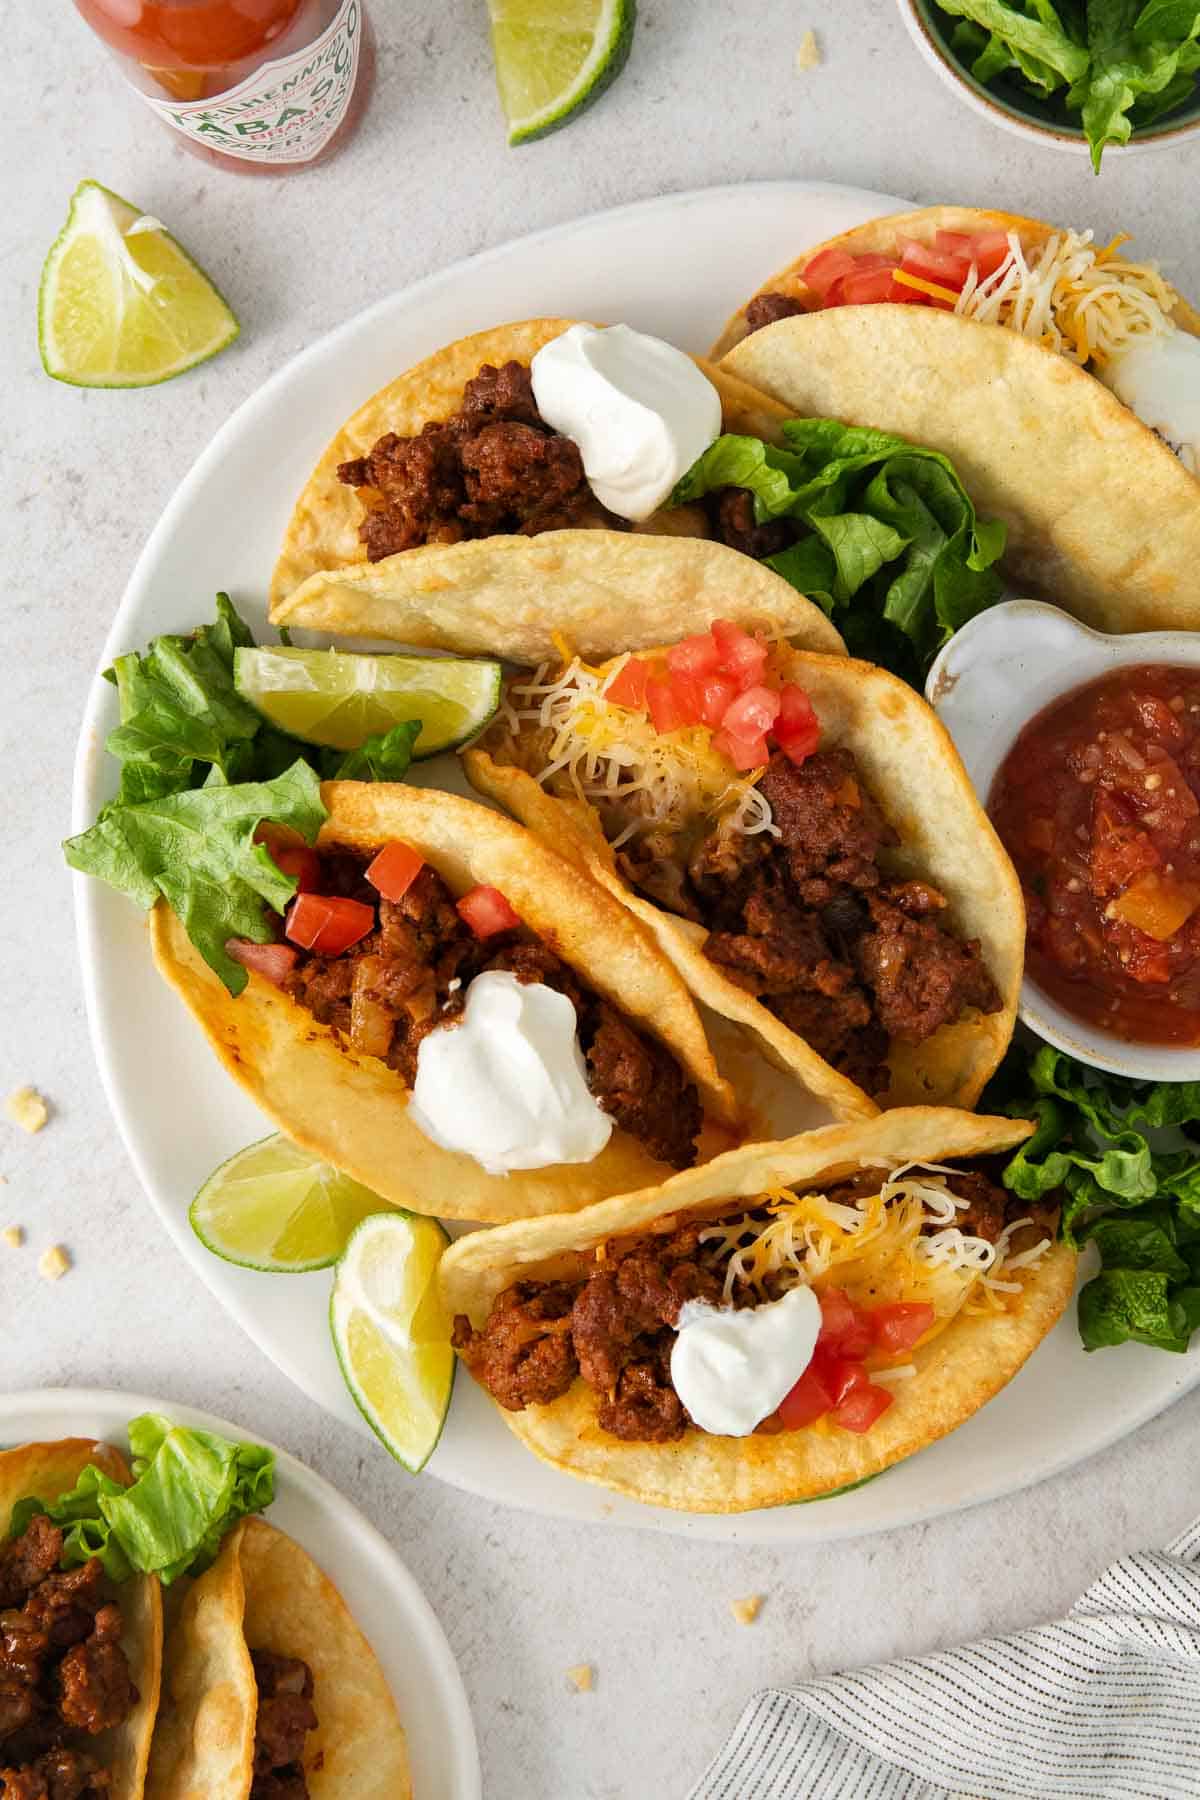 Gluten-free tacos on a plate with toppings